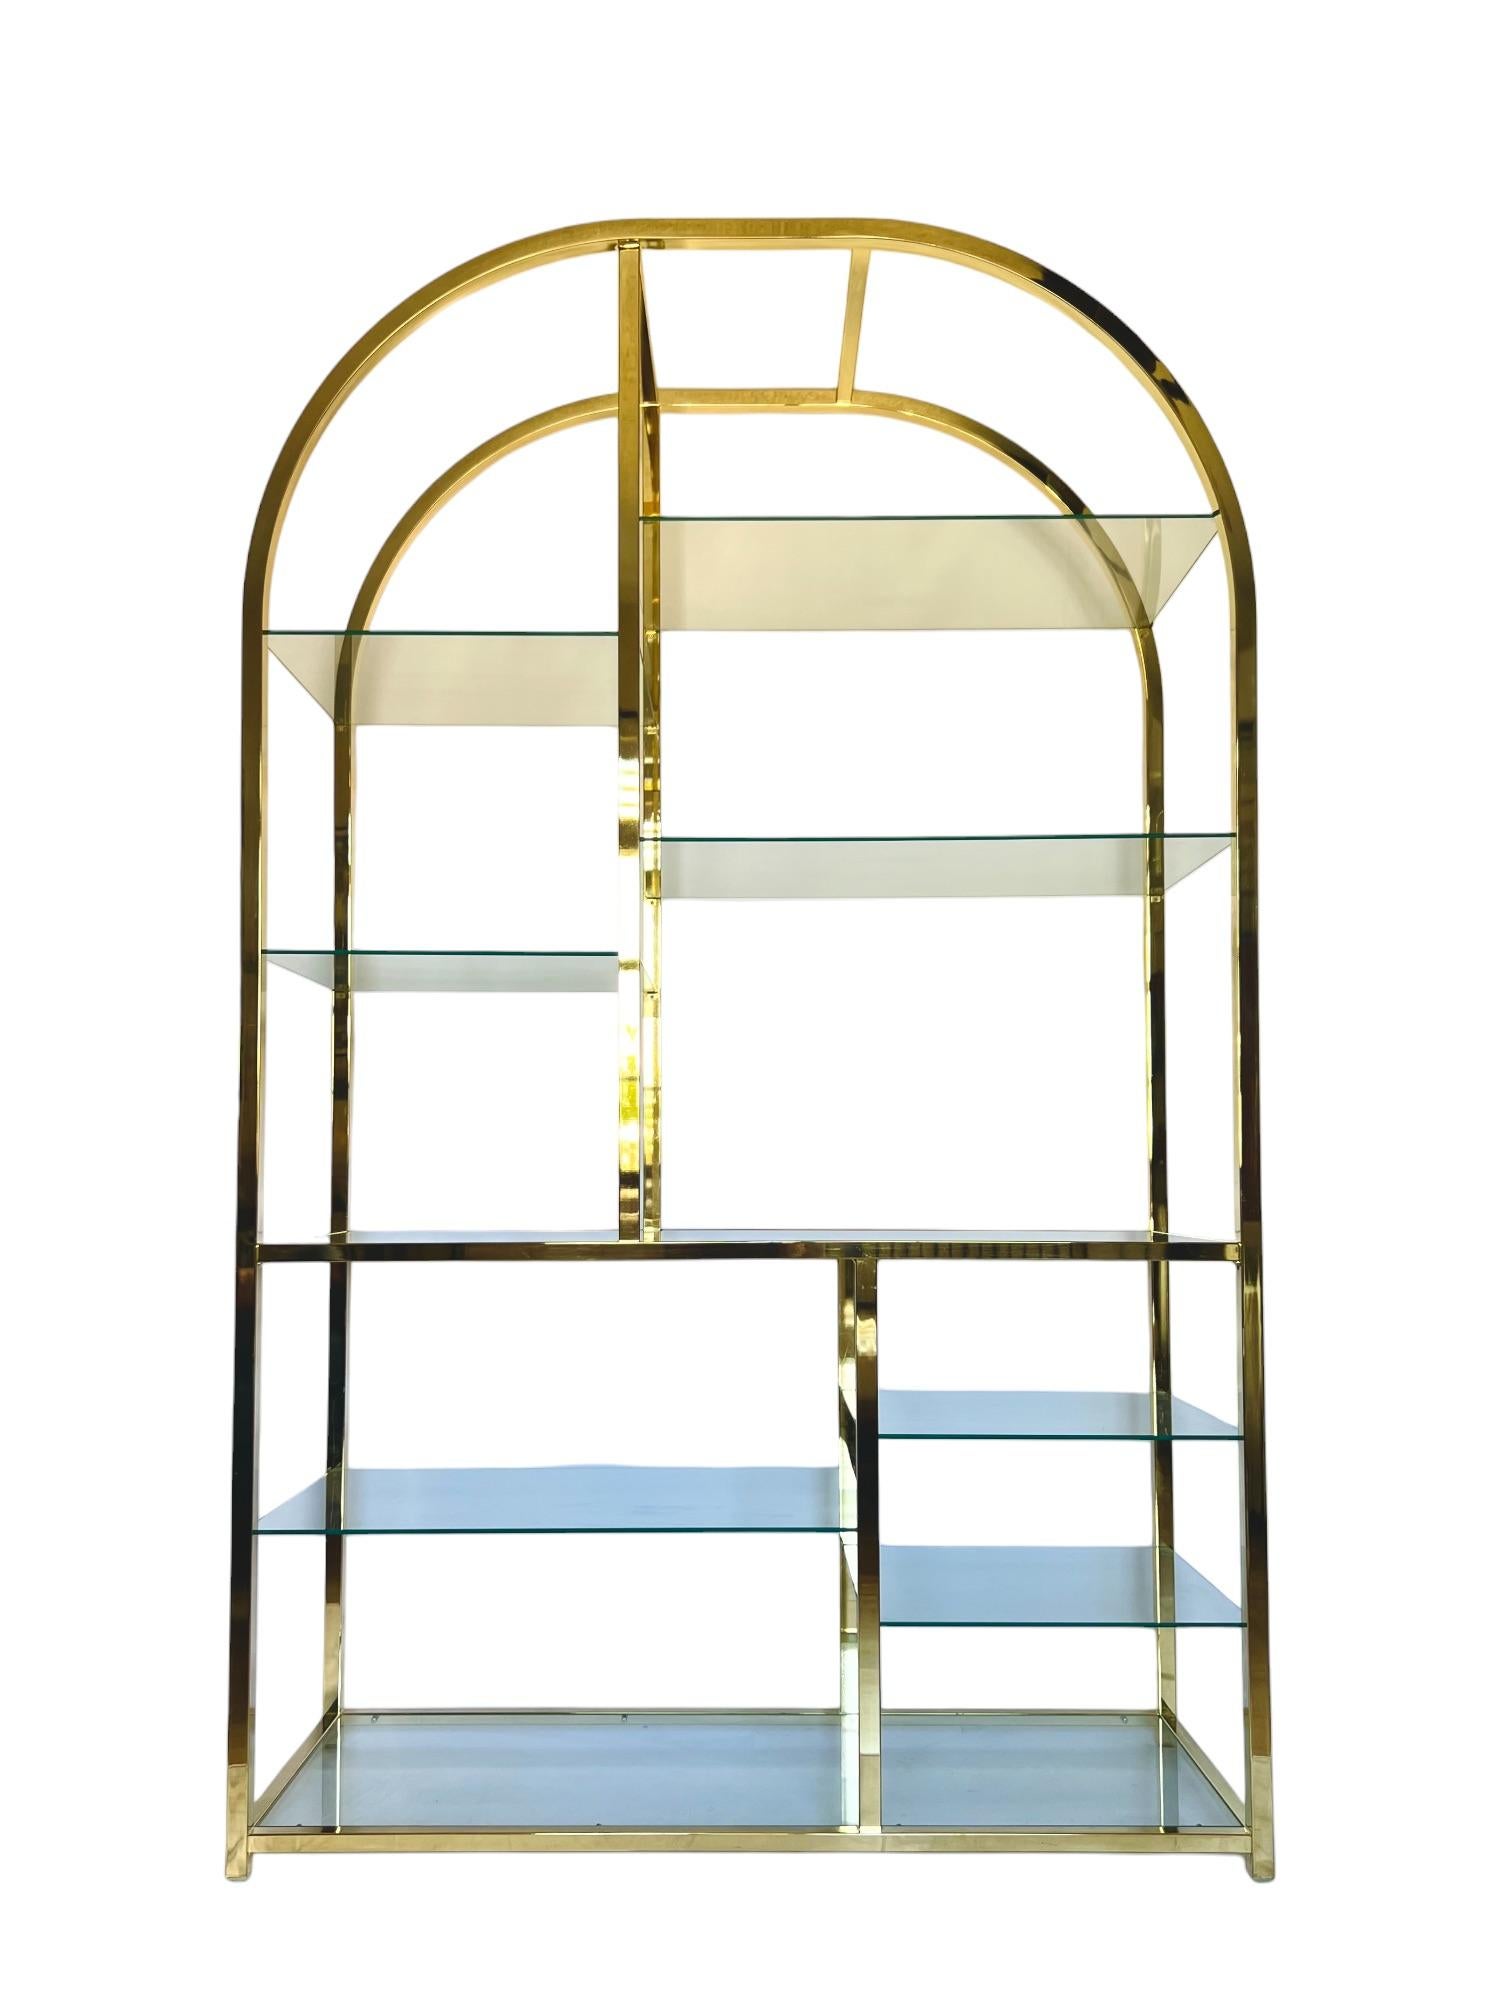 American Design Institute of America Gold Tiered Glass Arched Etagere, 1985